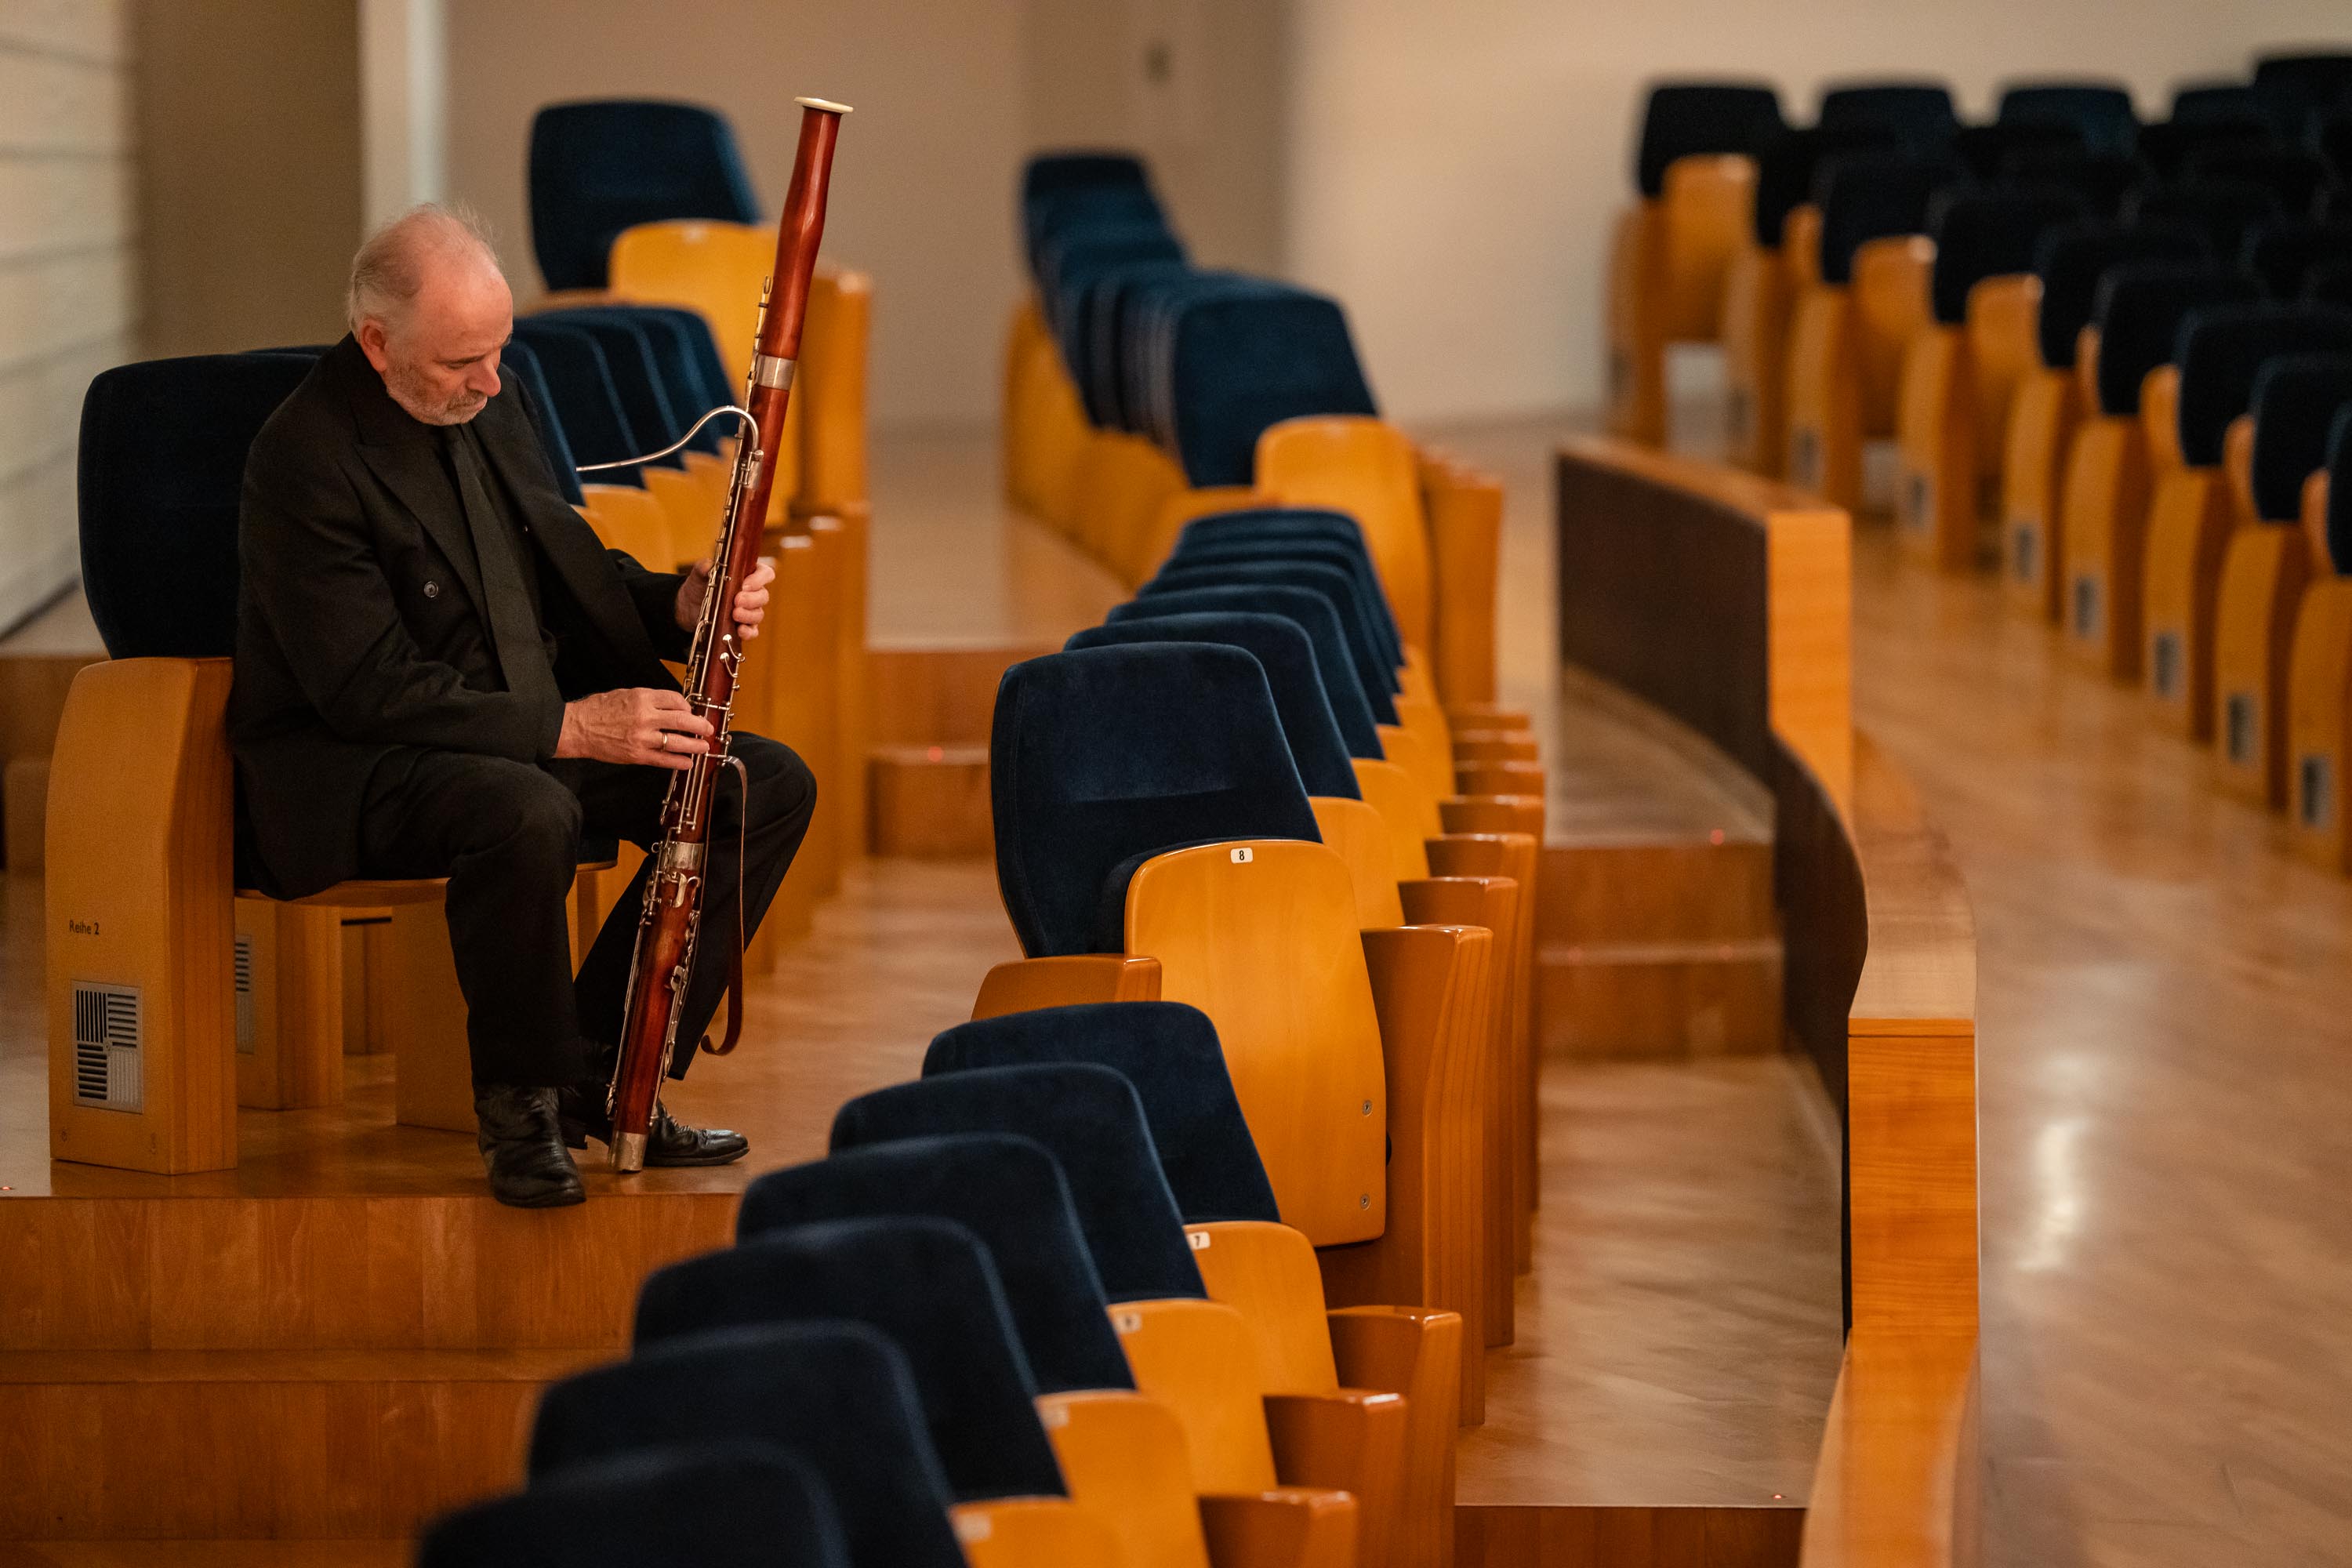 Co-Principal Bassoon Mark Gigliotti finds a space to check his instrument